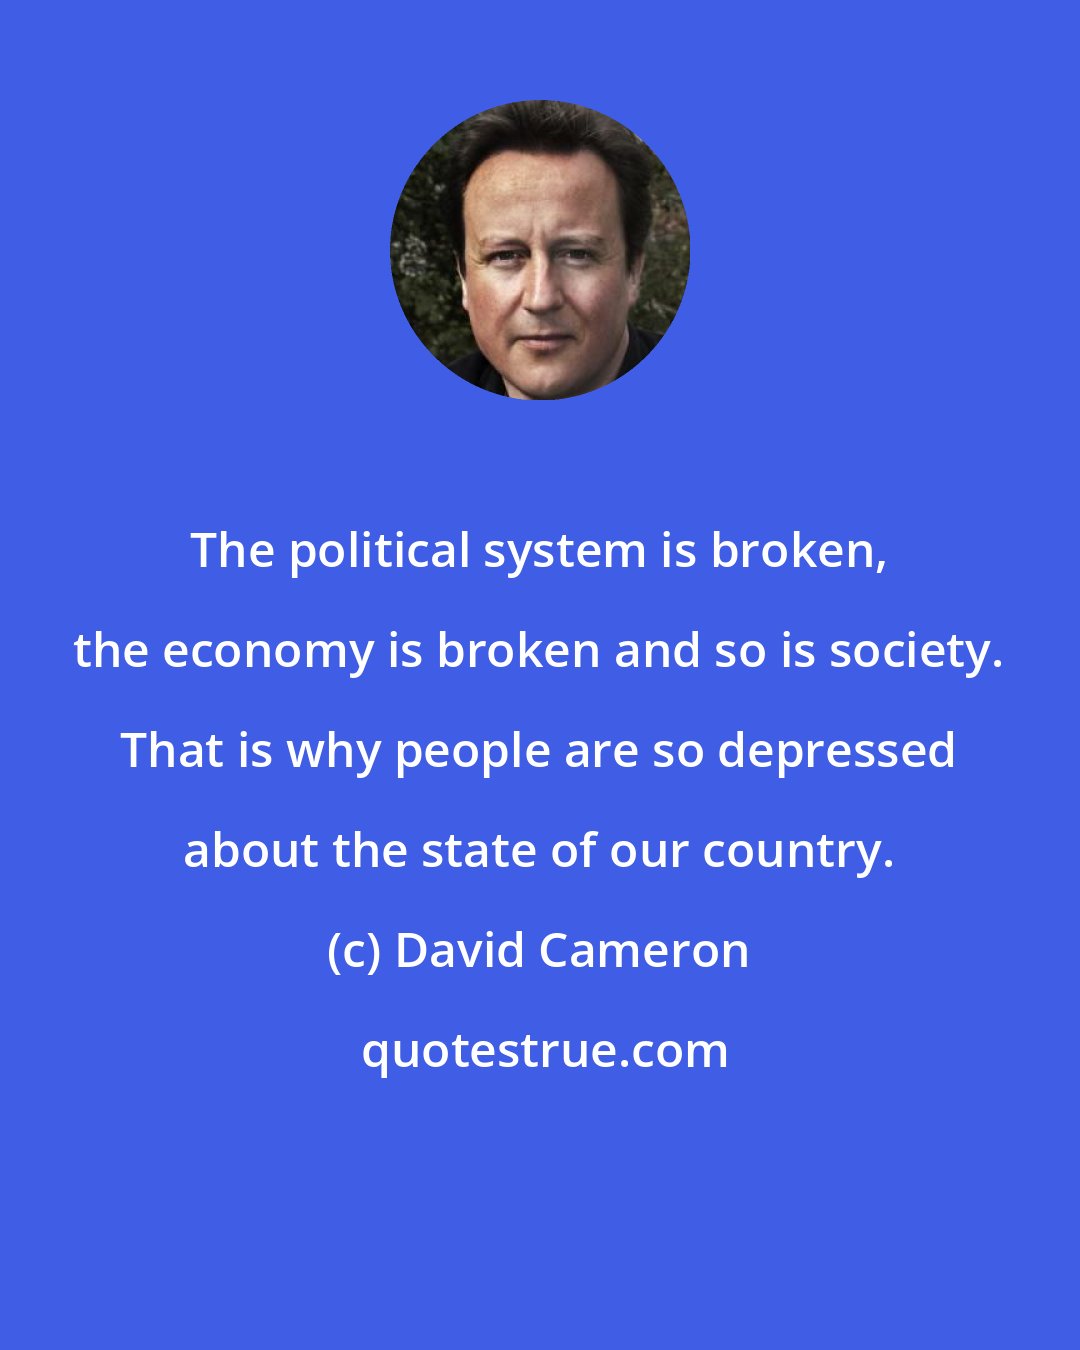 David Cameron: The political system is broken, the economy is broken and so is society. That is why people are so depressed about the state of our country.